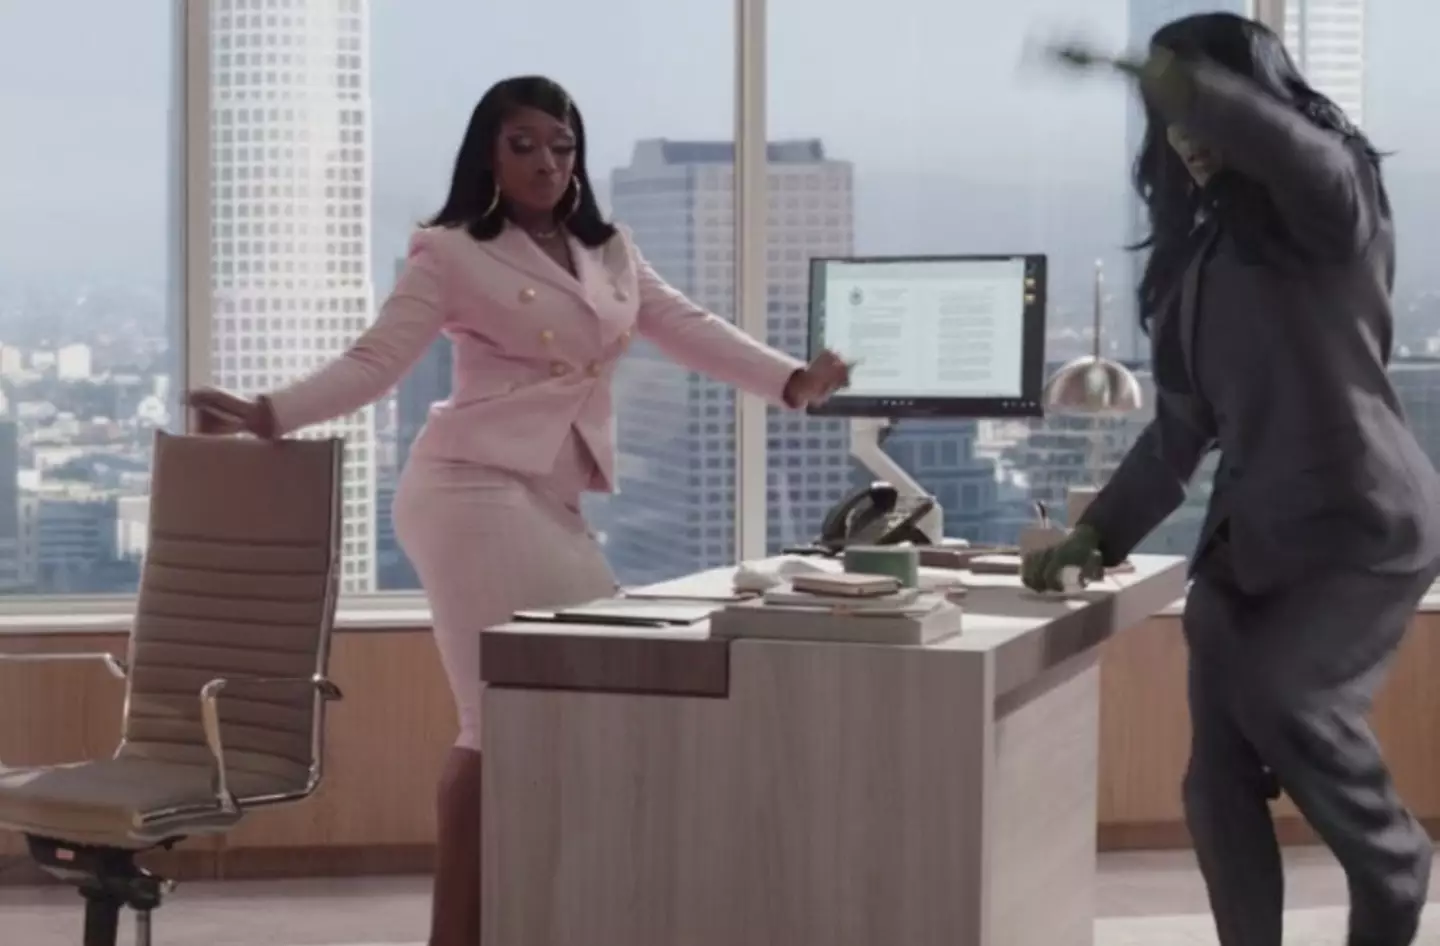 It seems She-Hulk viewers aren’t quite sure about episode three’s post-credits scene, featuring a world-famous rapper.